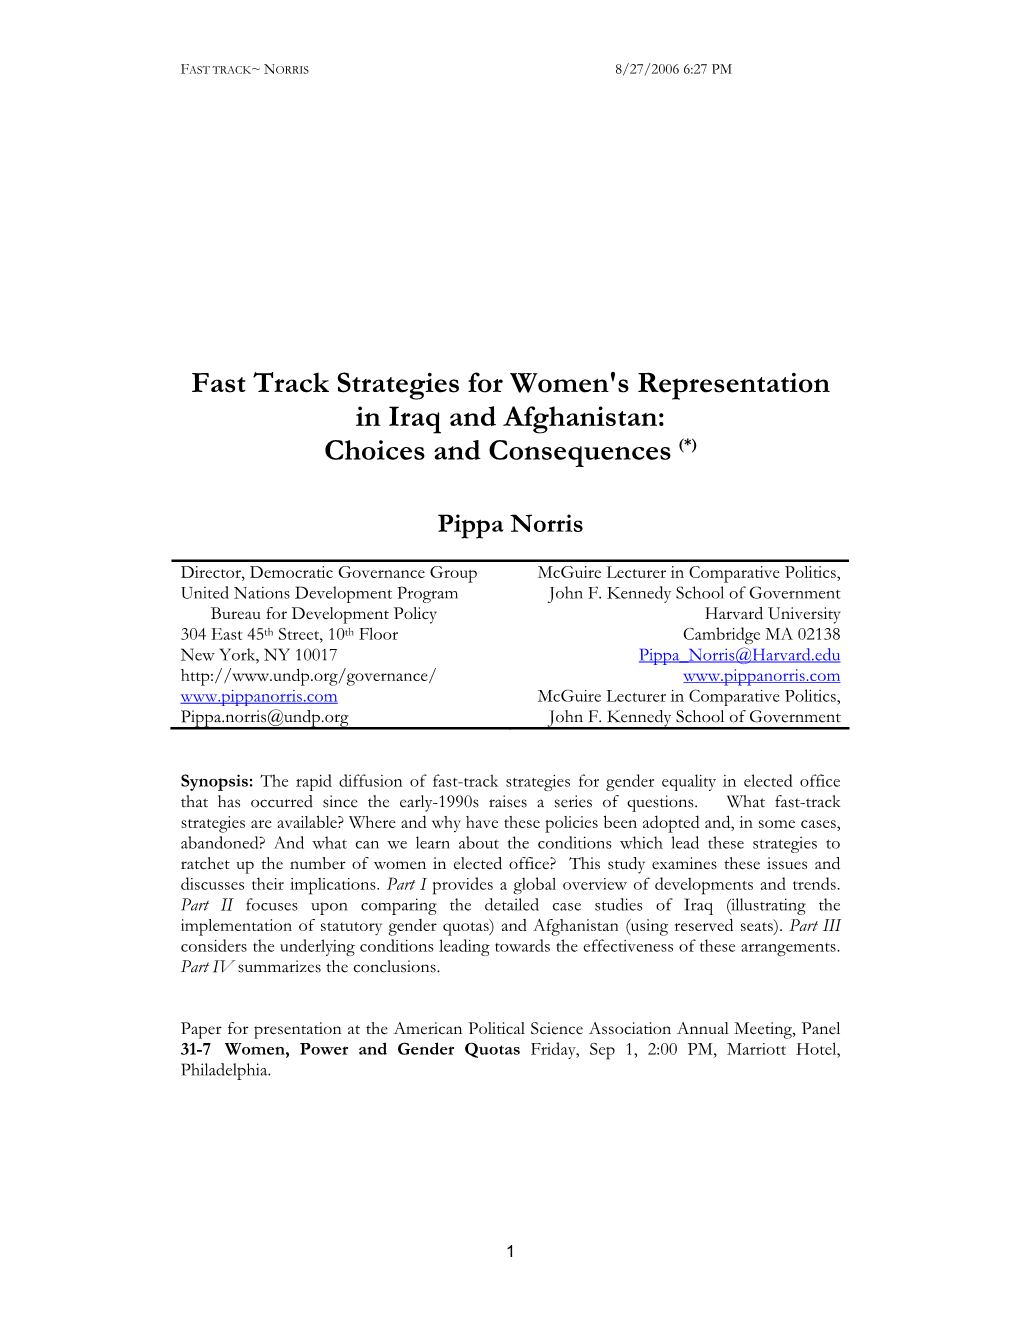 Fast Track Strategies for Women's Representation in Iraq and Afghanistan: Choices and Consequences (*)